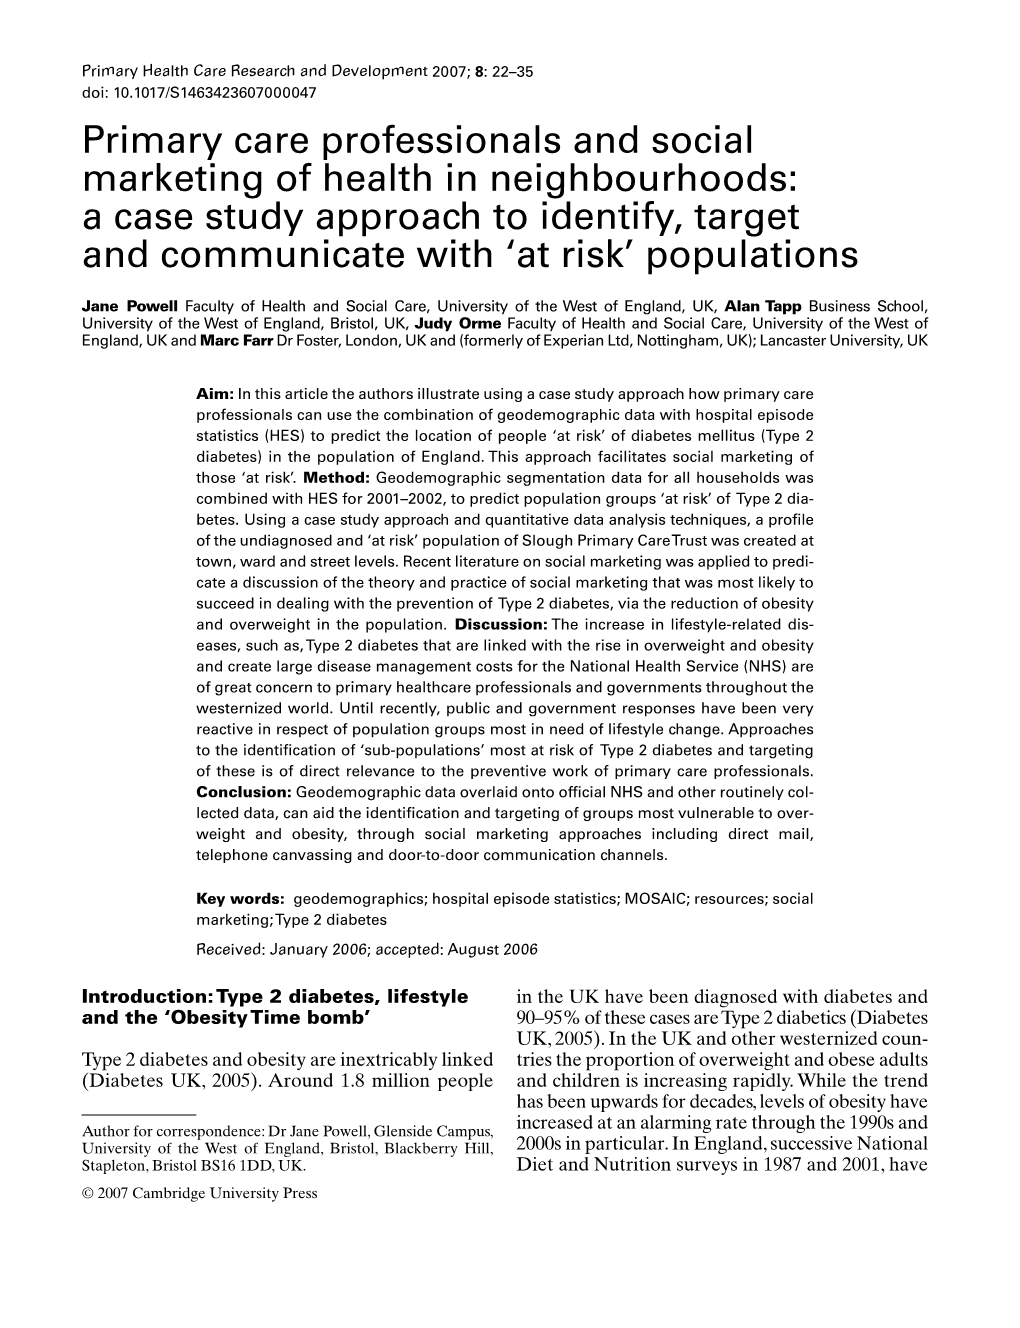 Primary Care Professionals and Social Marketing of Health in Neighbourhoods: a Case Study Approach to Identify, Target and Communicate with ‘At Risk’ Populations